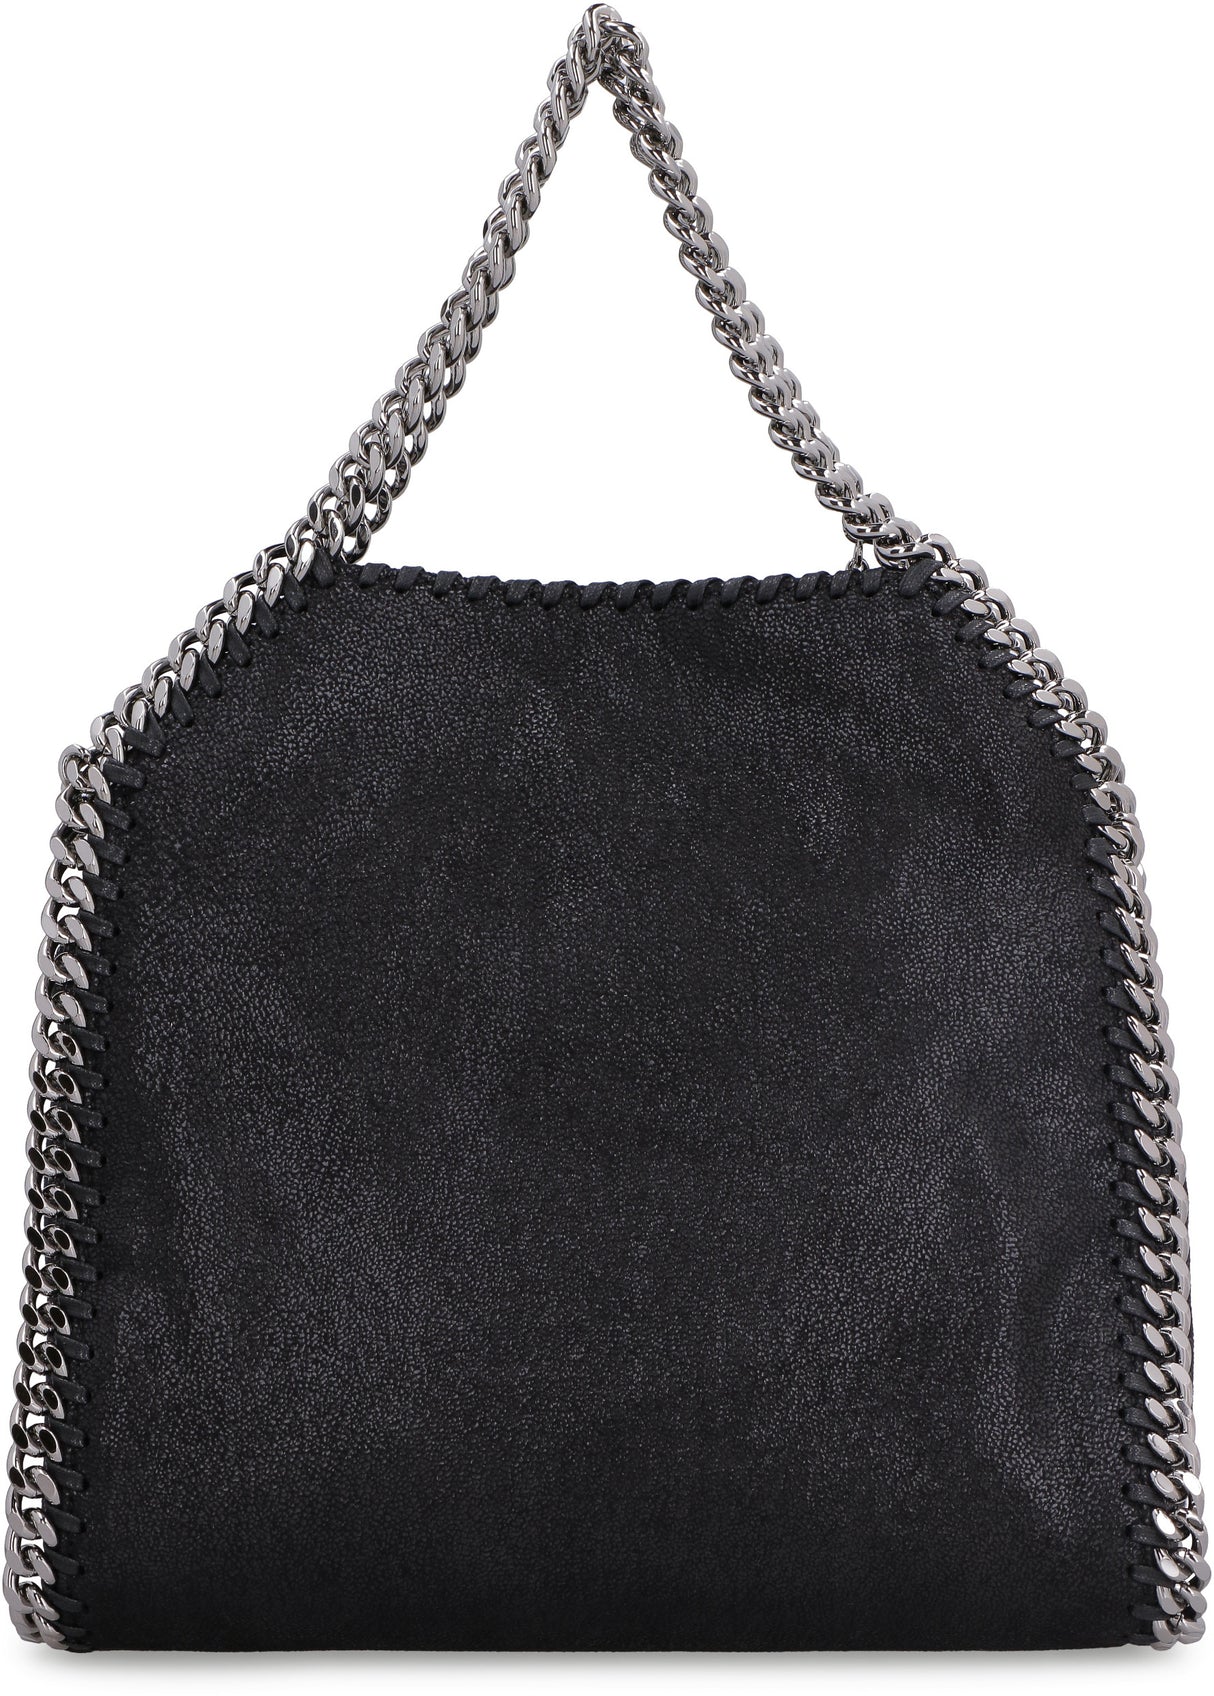 STELLA MCCARTNEY Mini Falabella Tote with Chain Detail and Magnetic Closure in Black